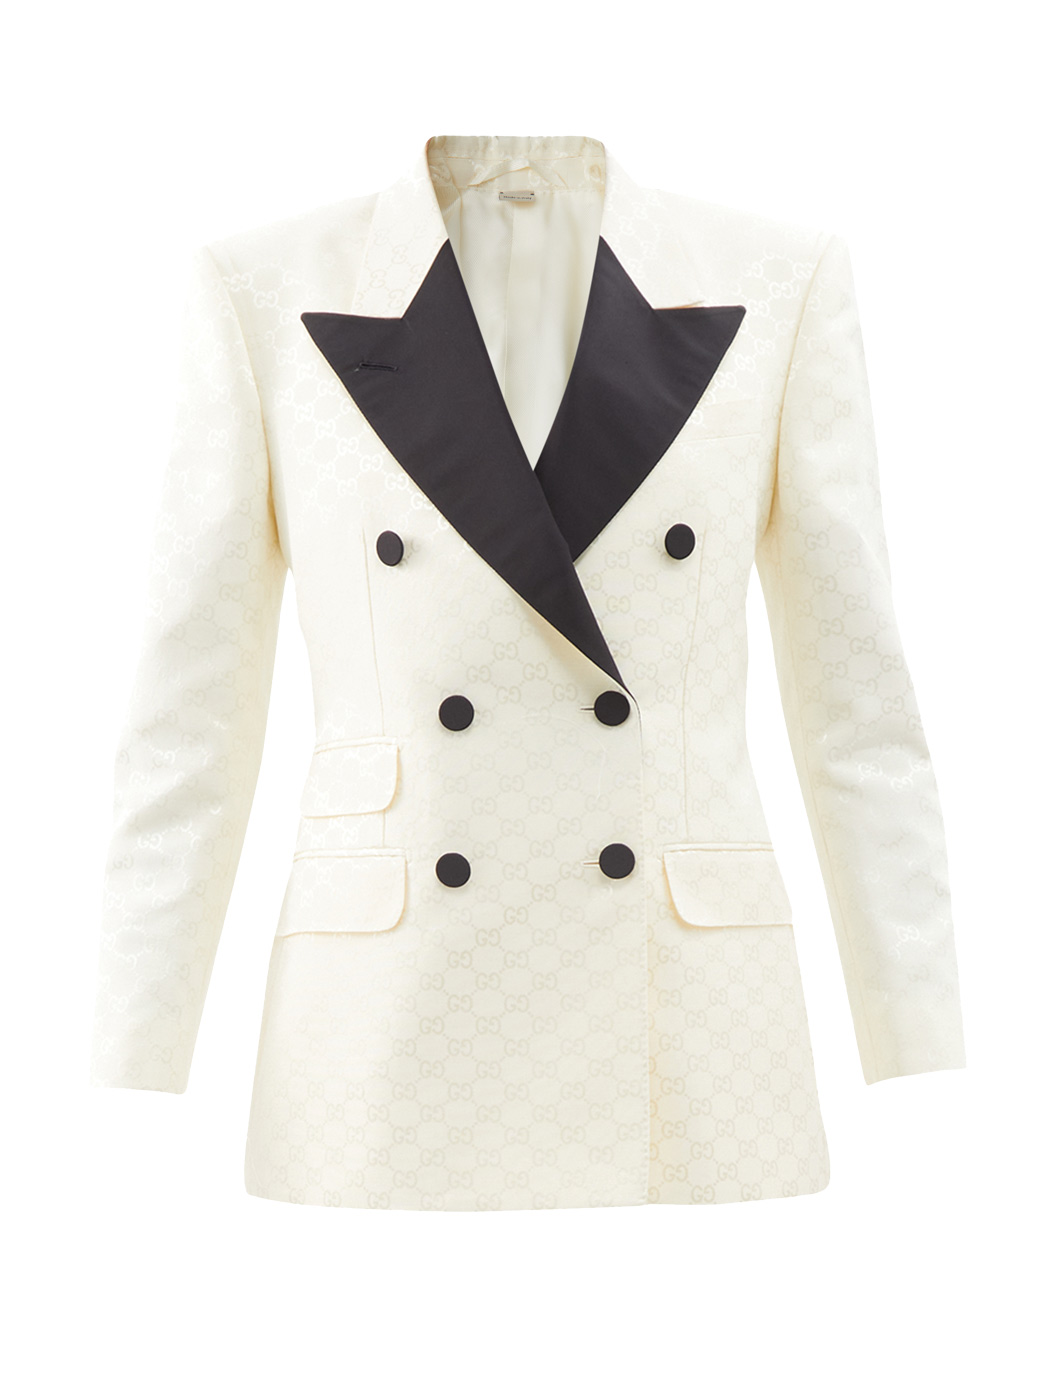 32 Gucci, Gg Double Breasted Cotton Blend Tuxedo Jacket, Matchesfashion.com Us